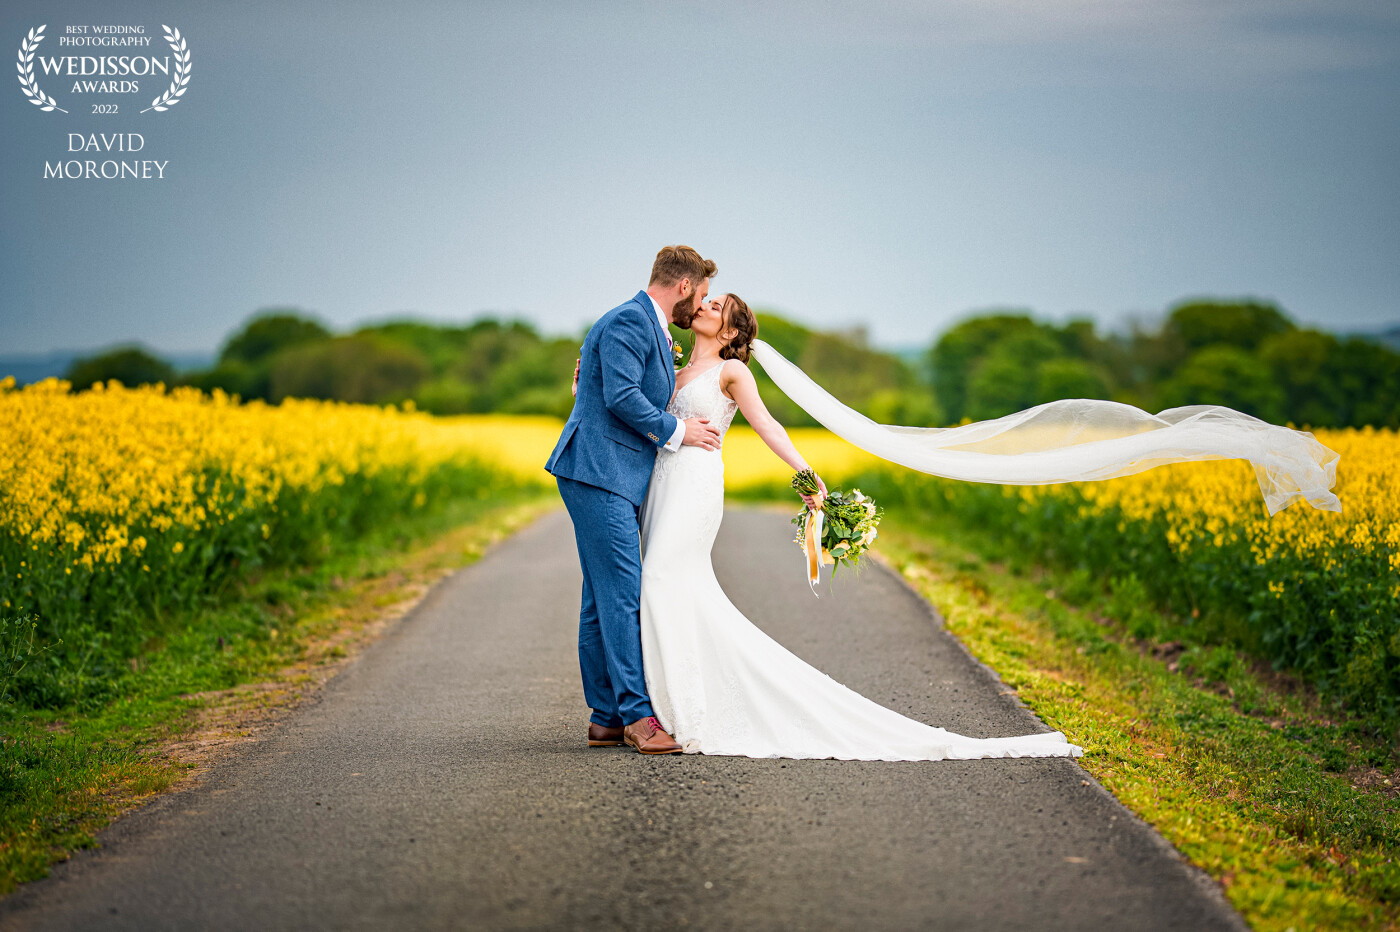 I had spotted the yellow rapeseed field on the way to venue. I was photographing bridal prep when the flowers arrived and thought what a perfect match...